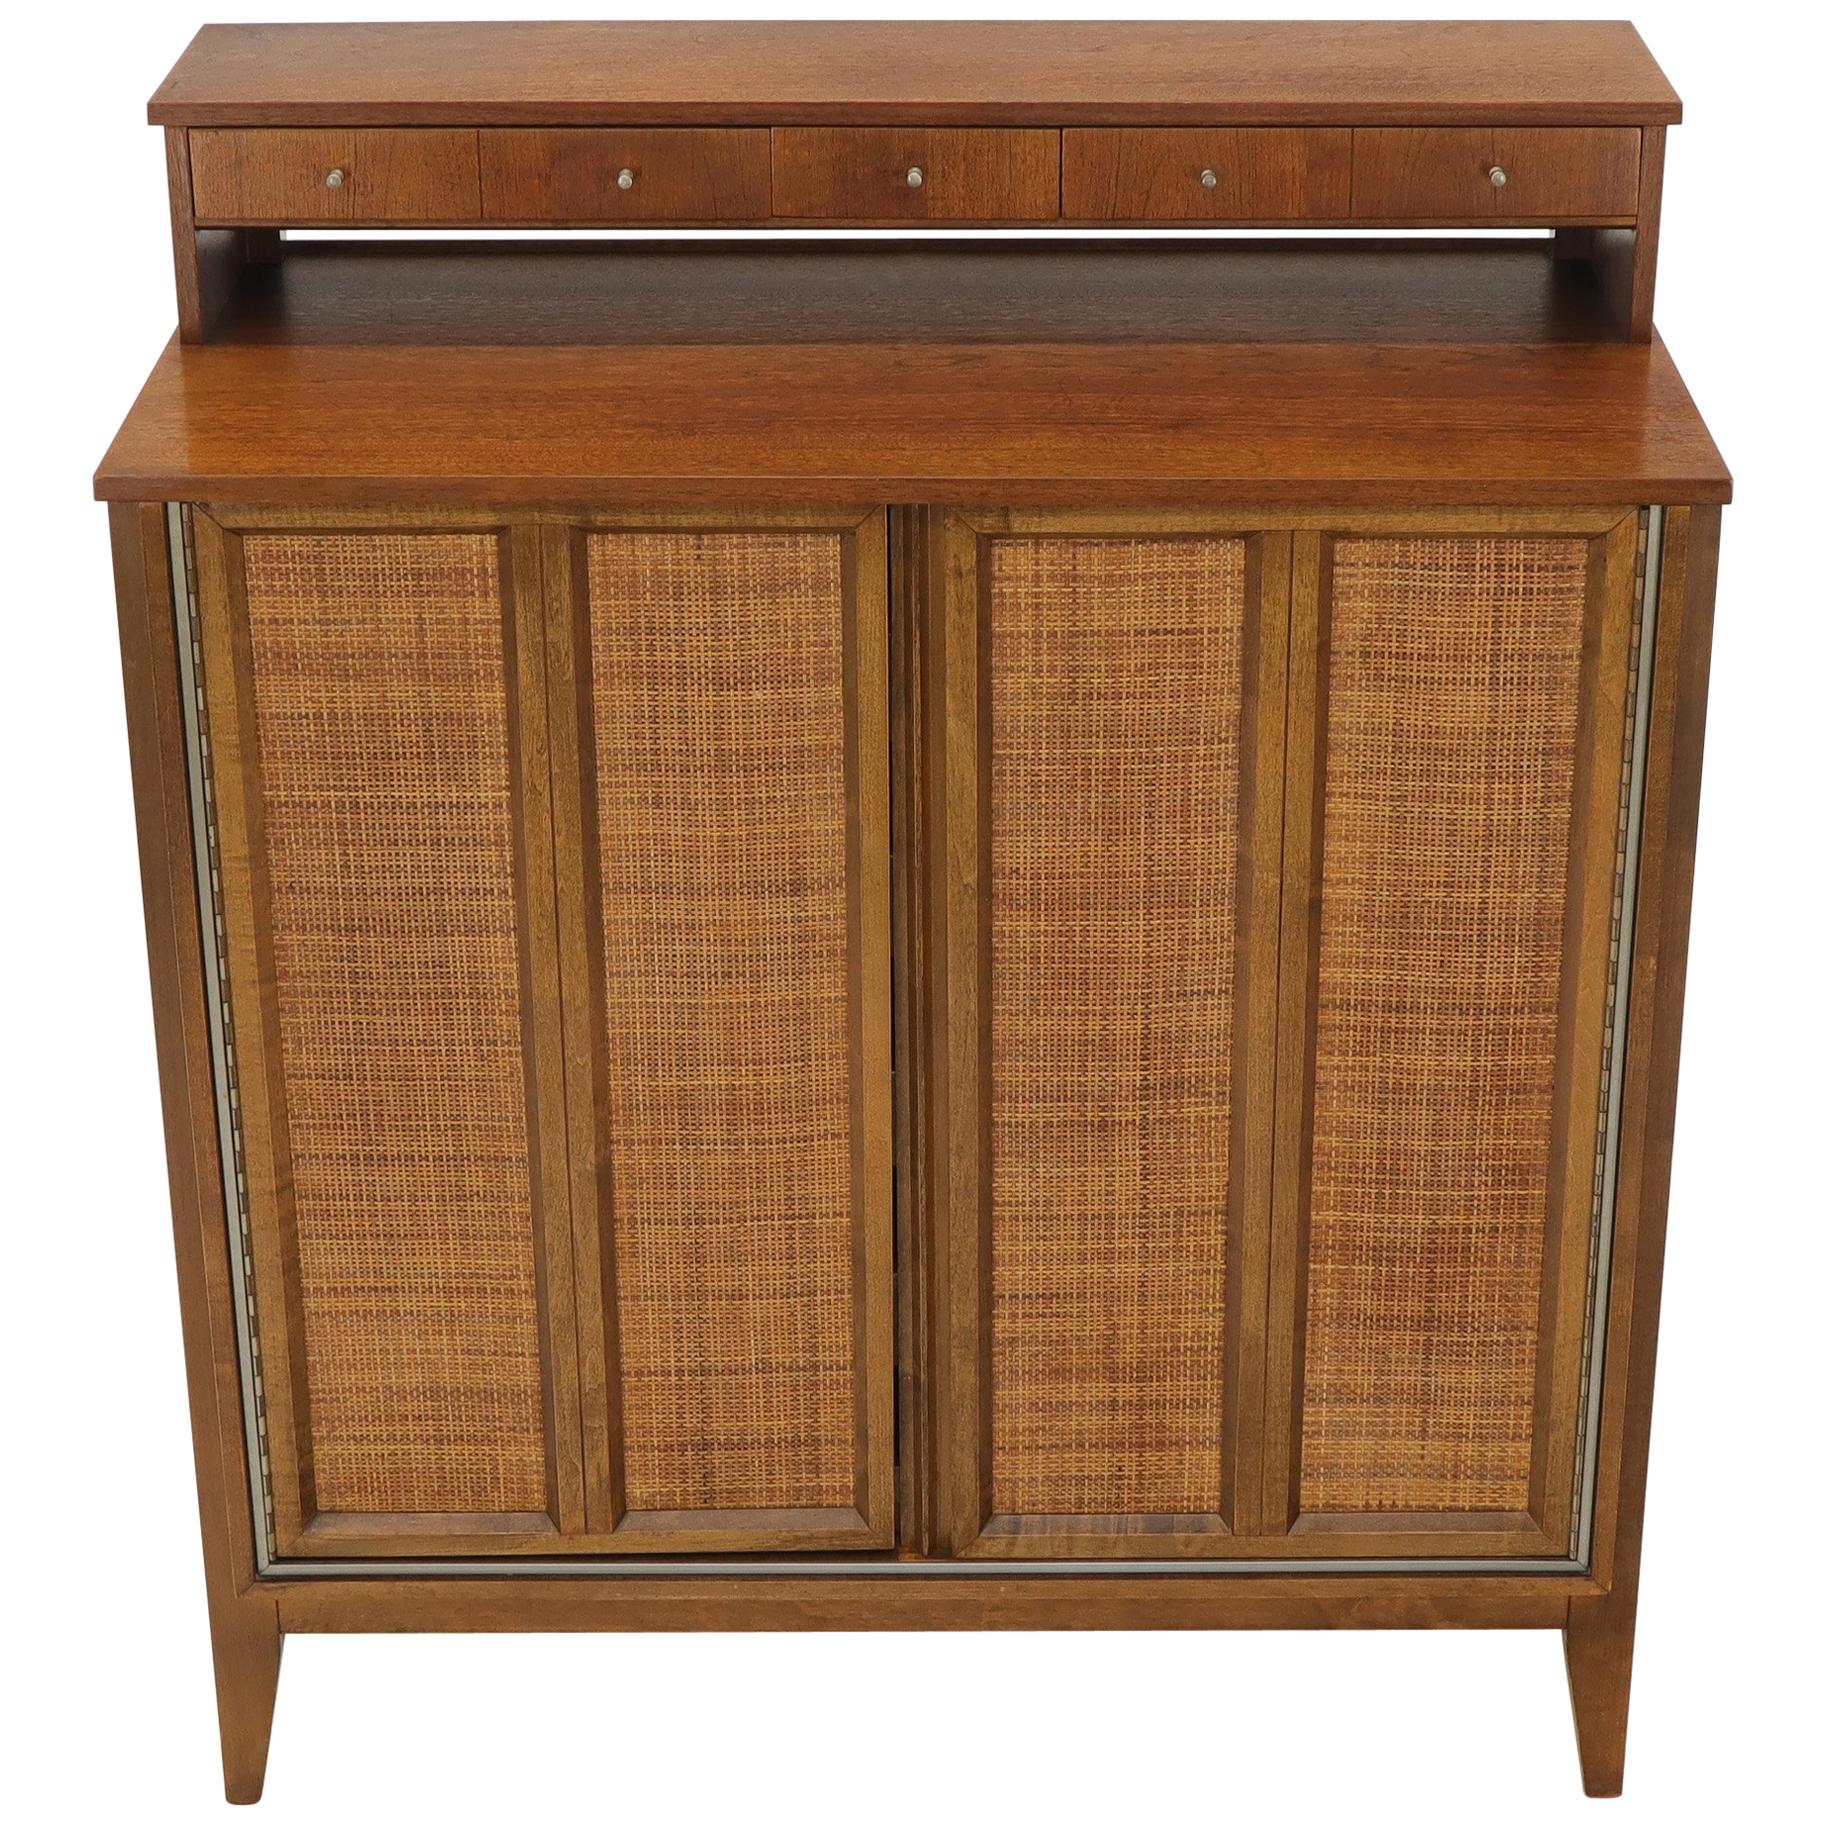 Mid-Century Modern High Chest Dresser with Separate Jewelry Compartment on Top